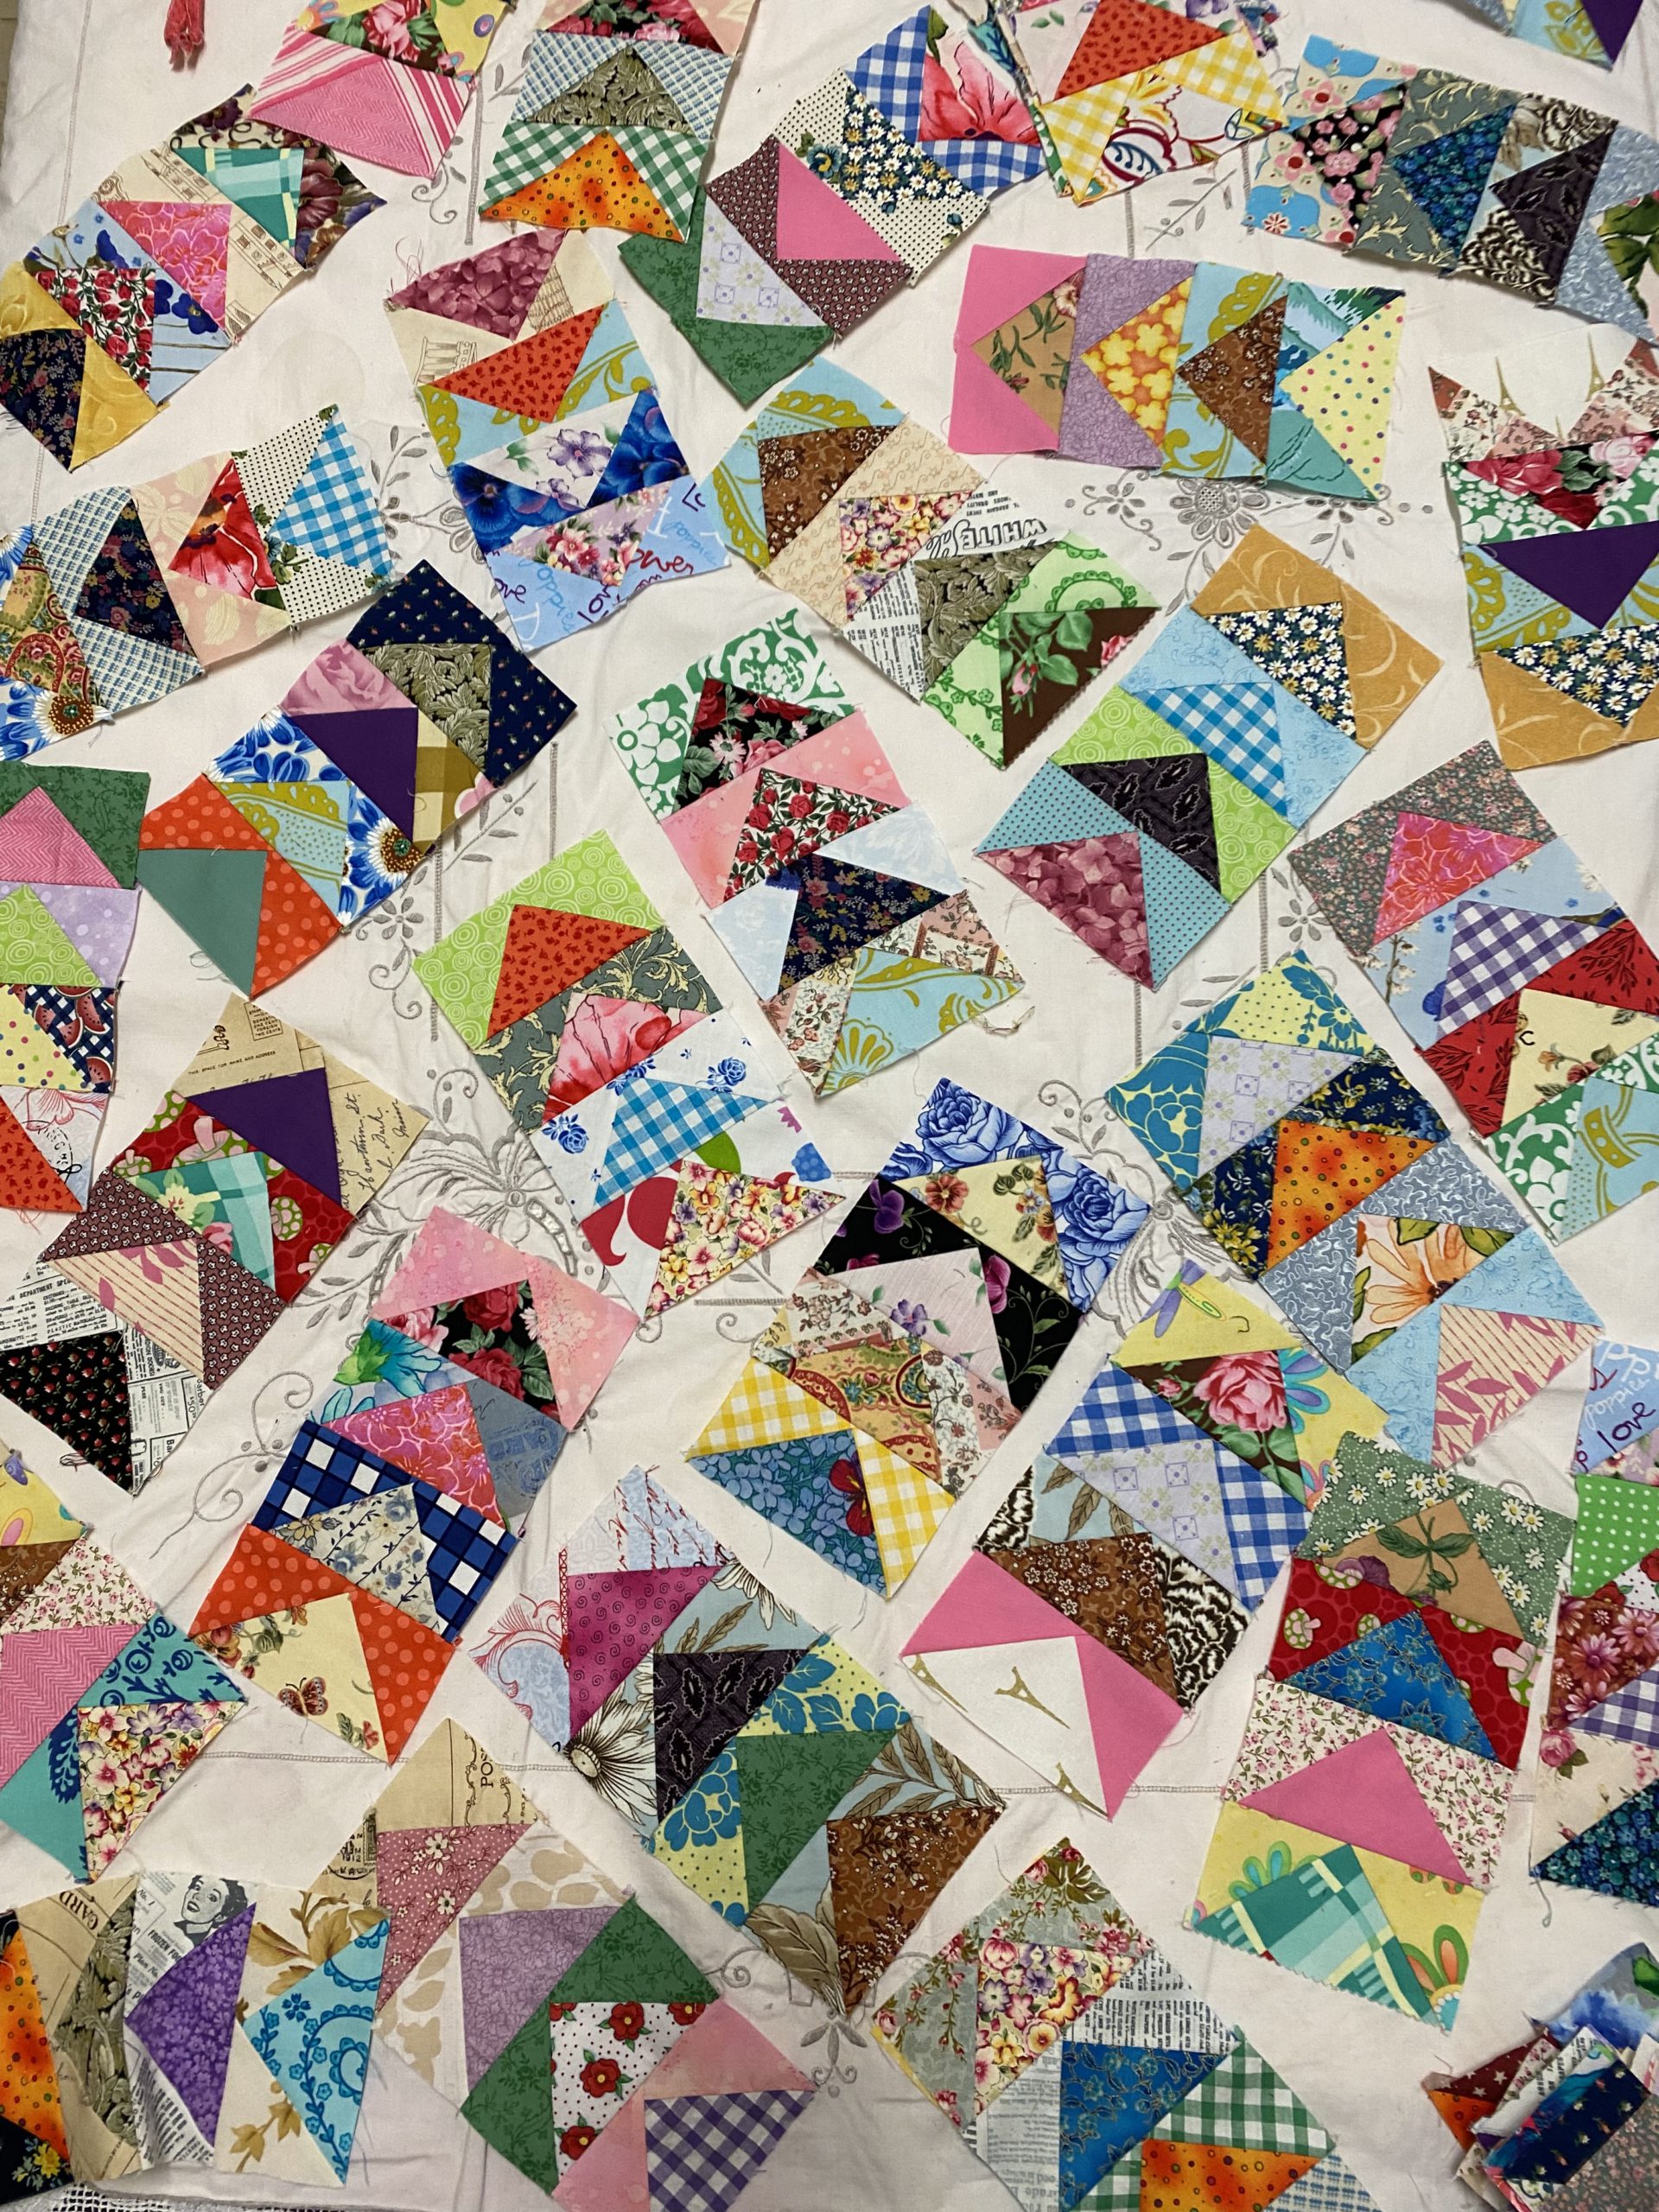 flying geese no waste method chart - Google Search  Flying geese quilt,  Flying geese, Modern quilting designs